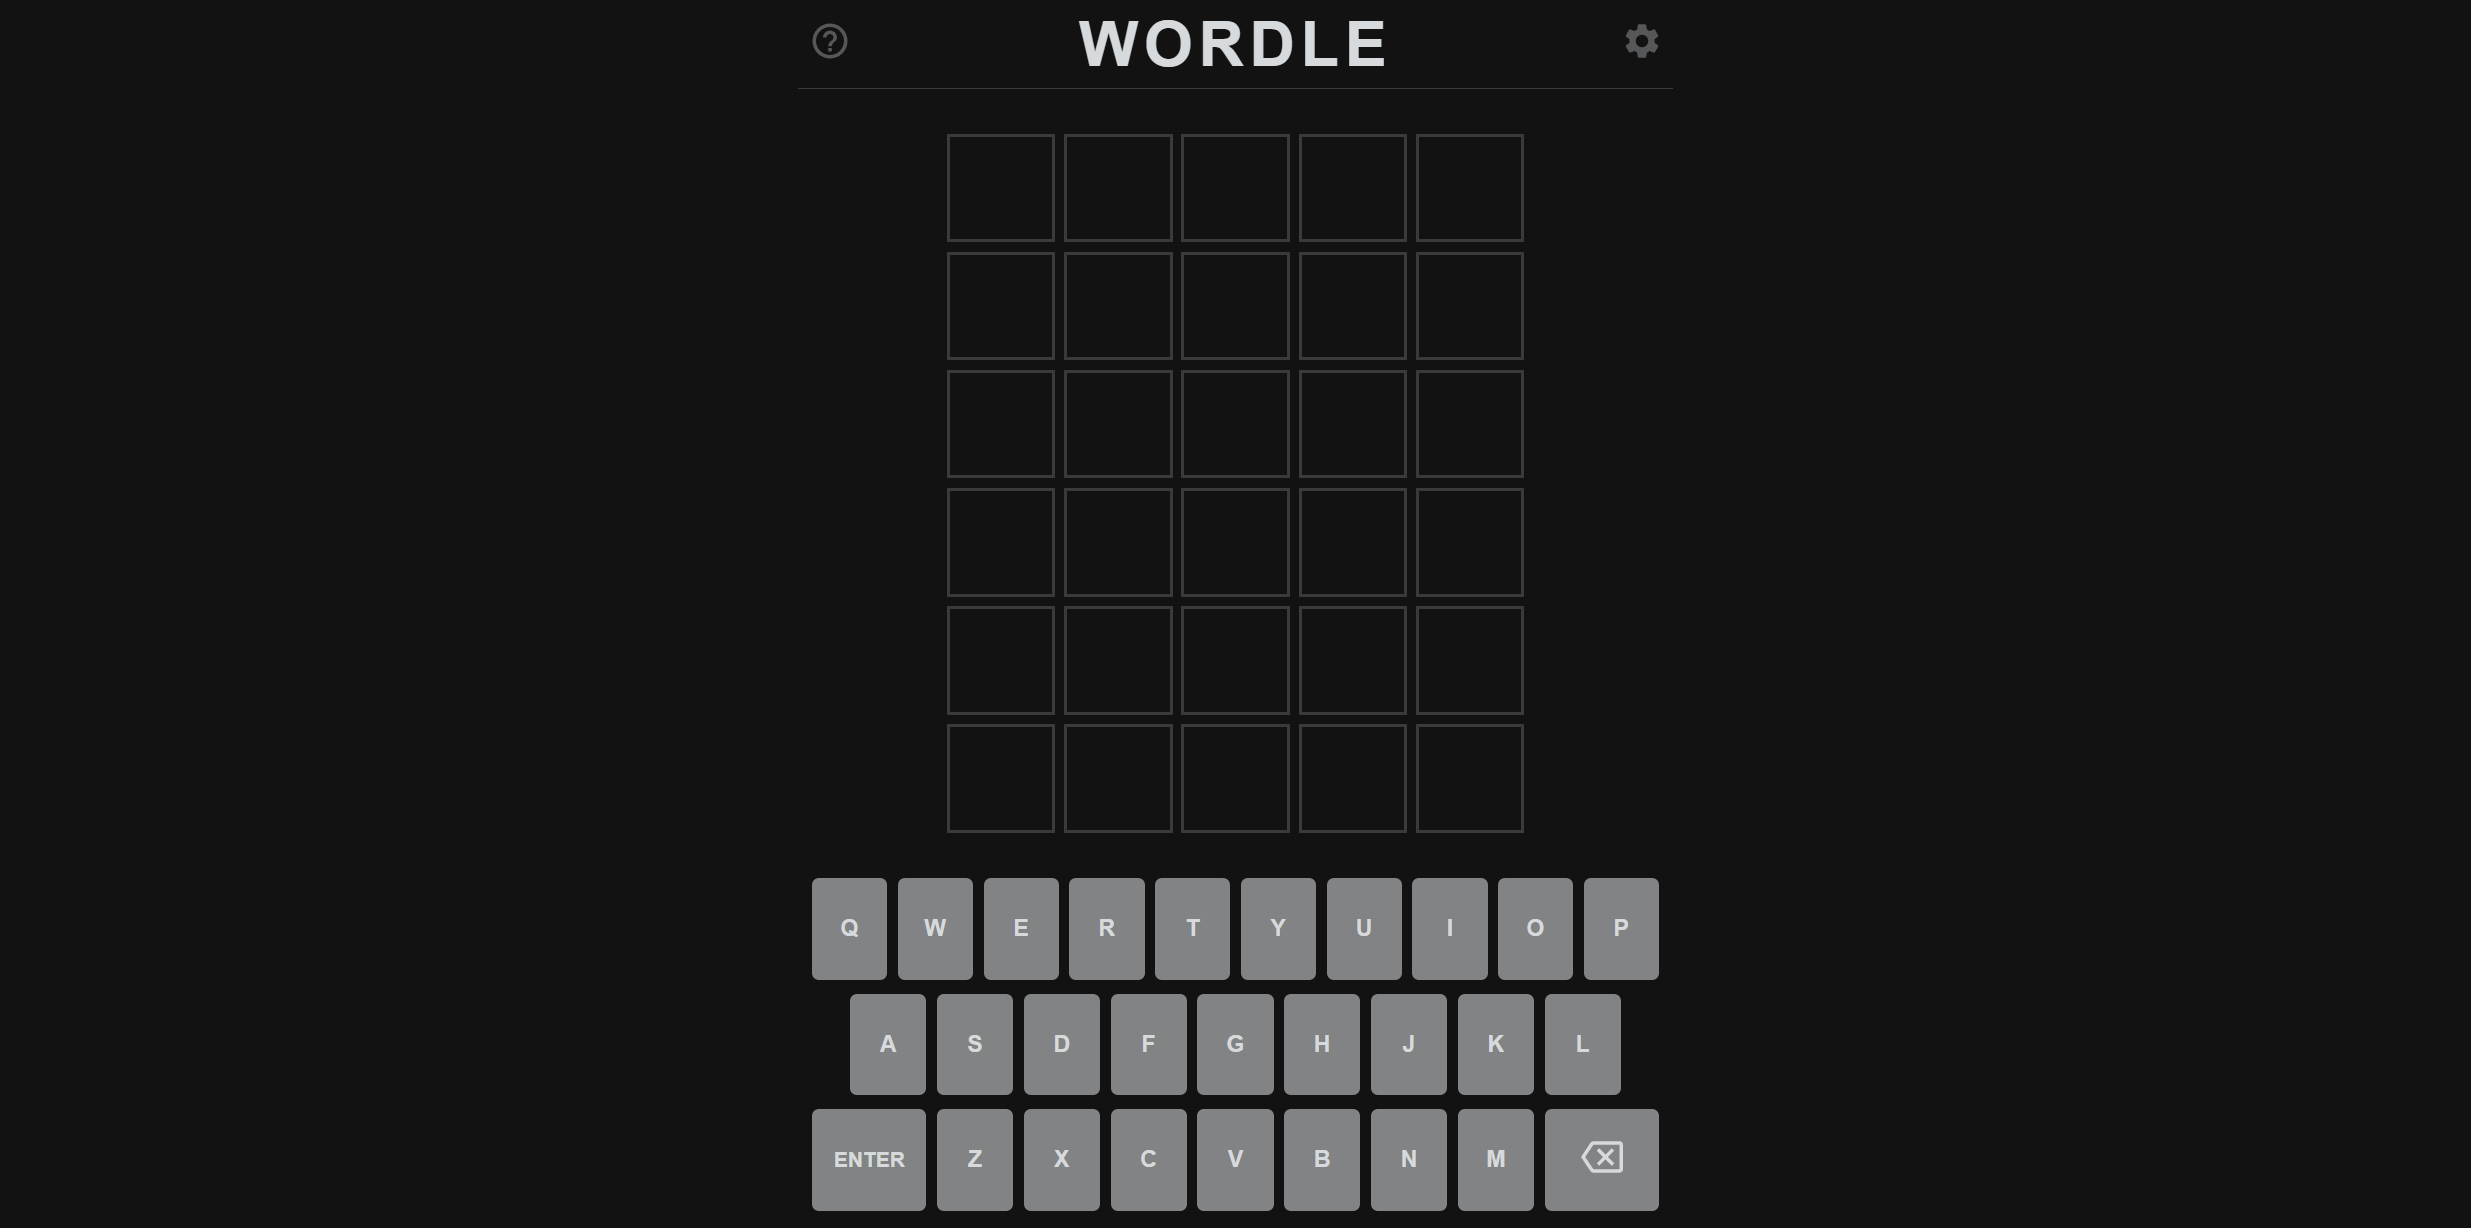 A screenshot of an empty Wordle puzzle with the dark theme active. The title 